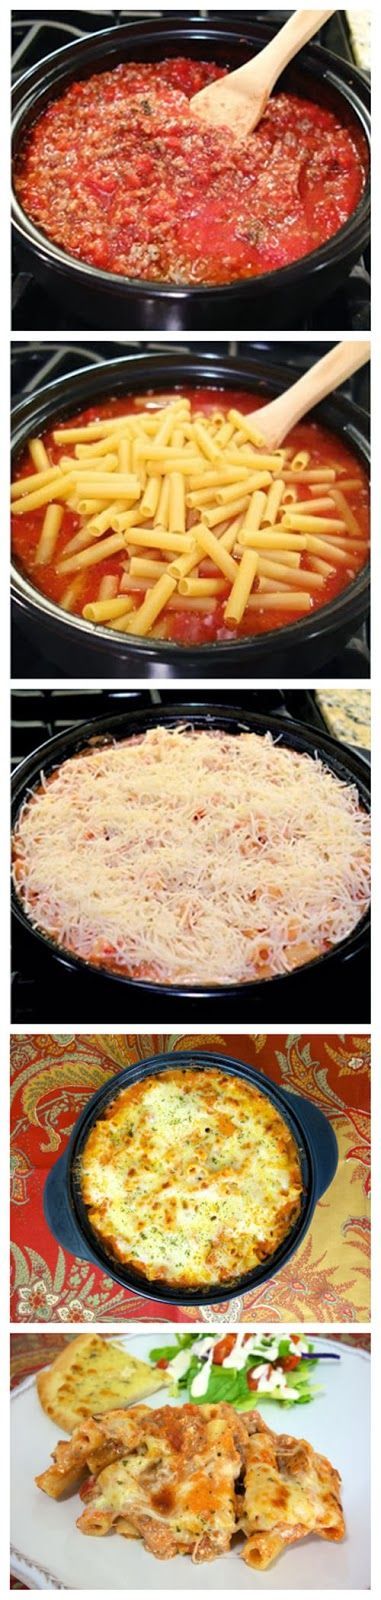 One-Pot Baked Ziti-use more ricotta cheese and tomatoes next